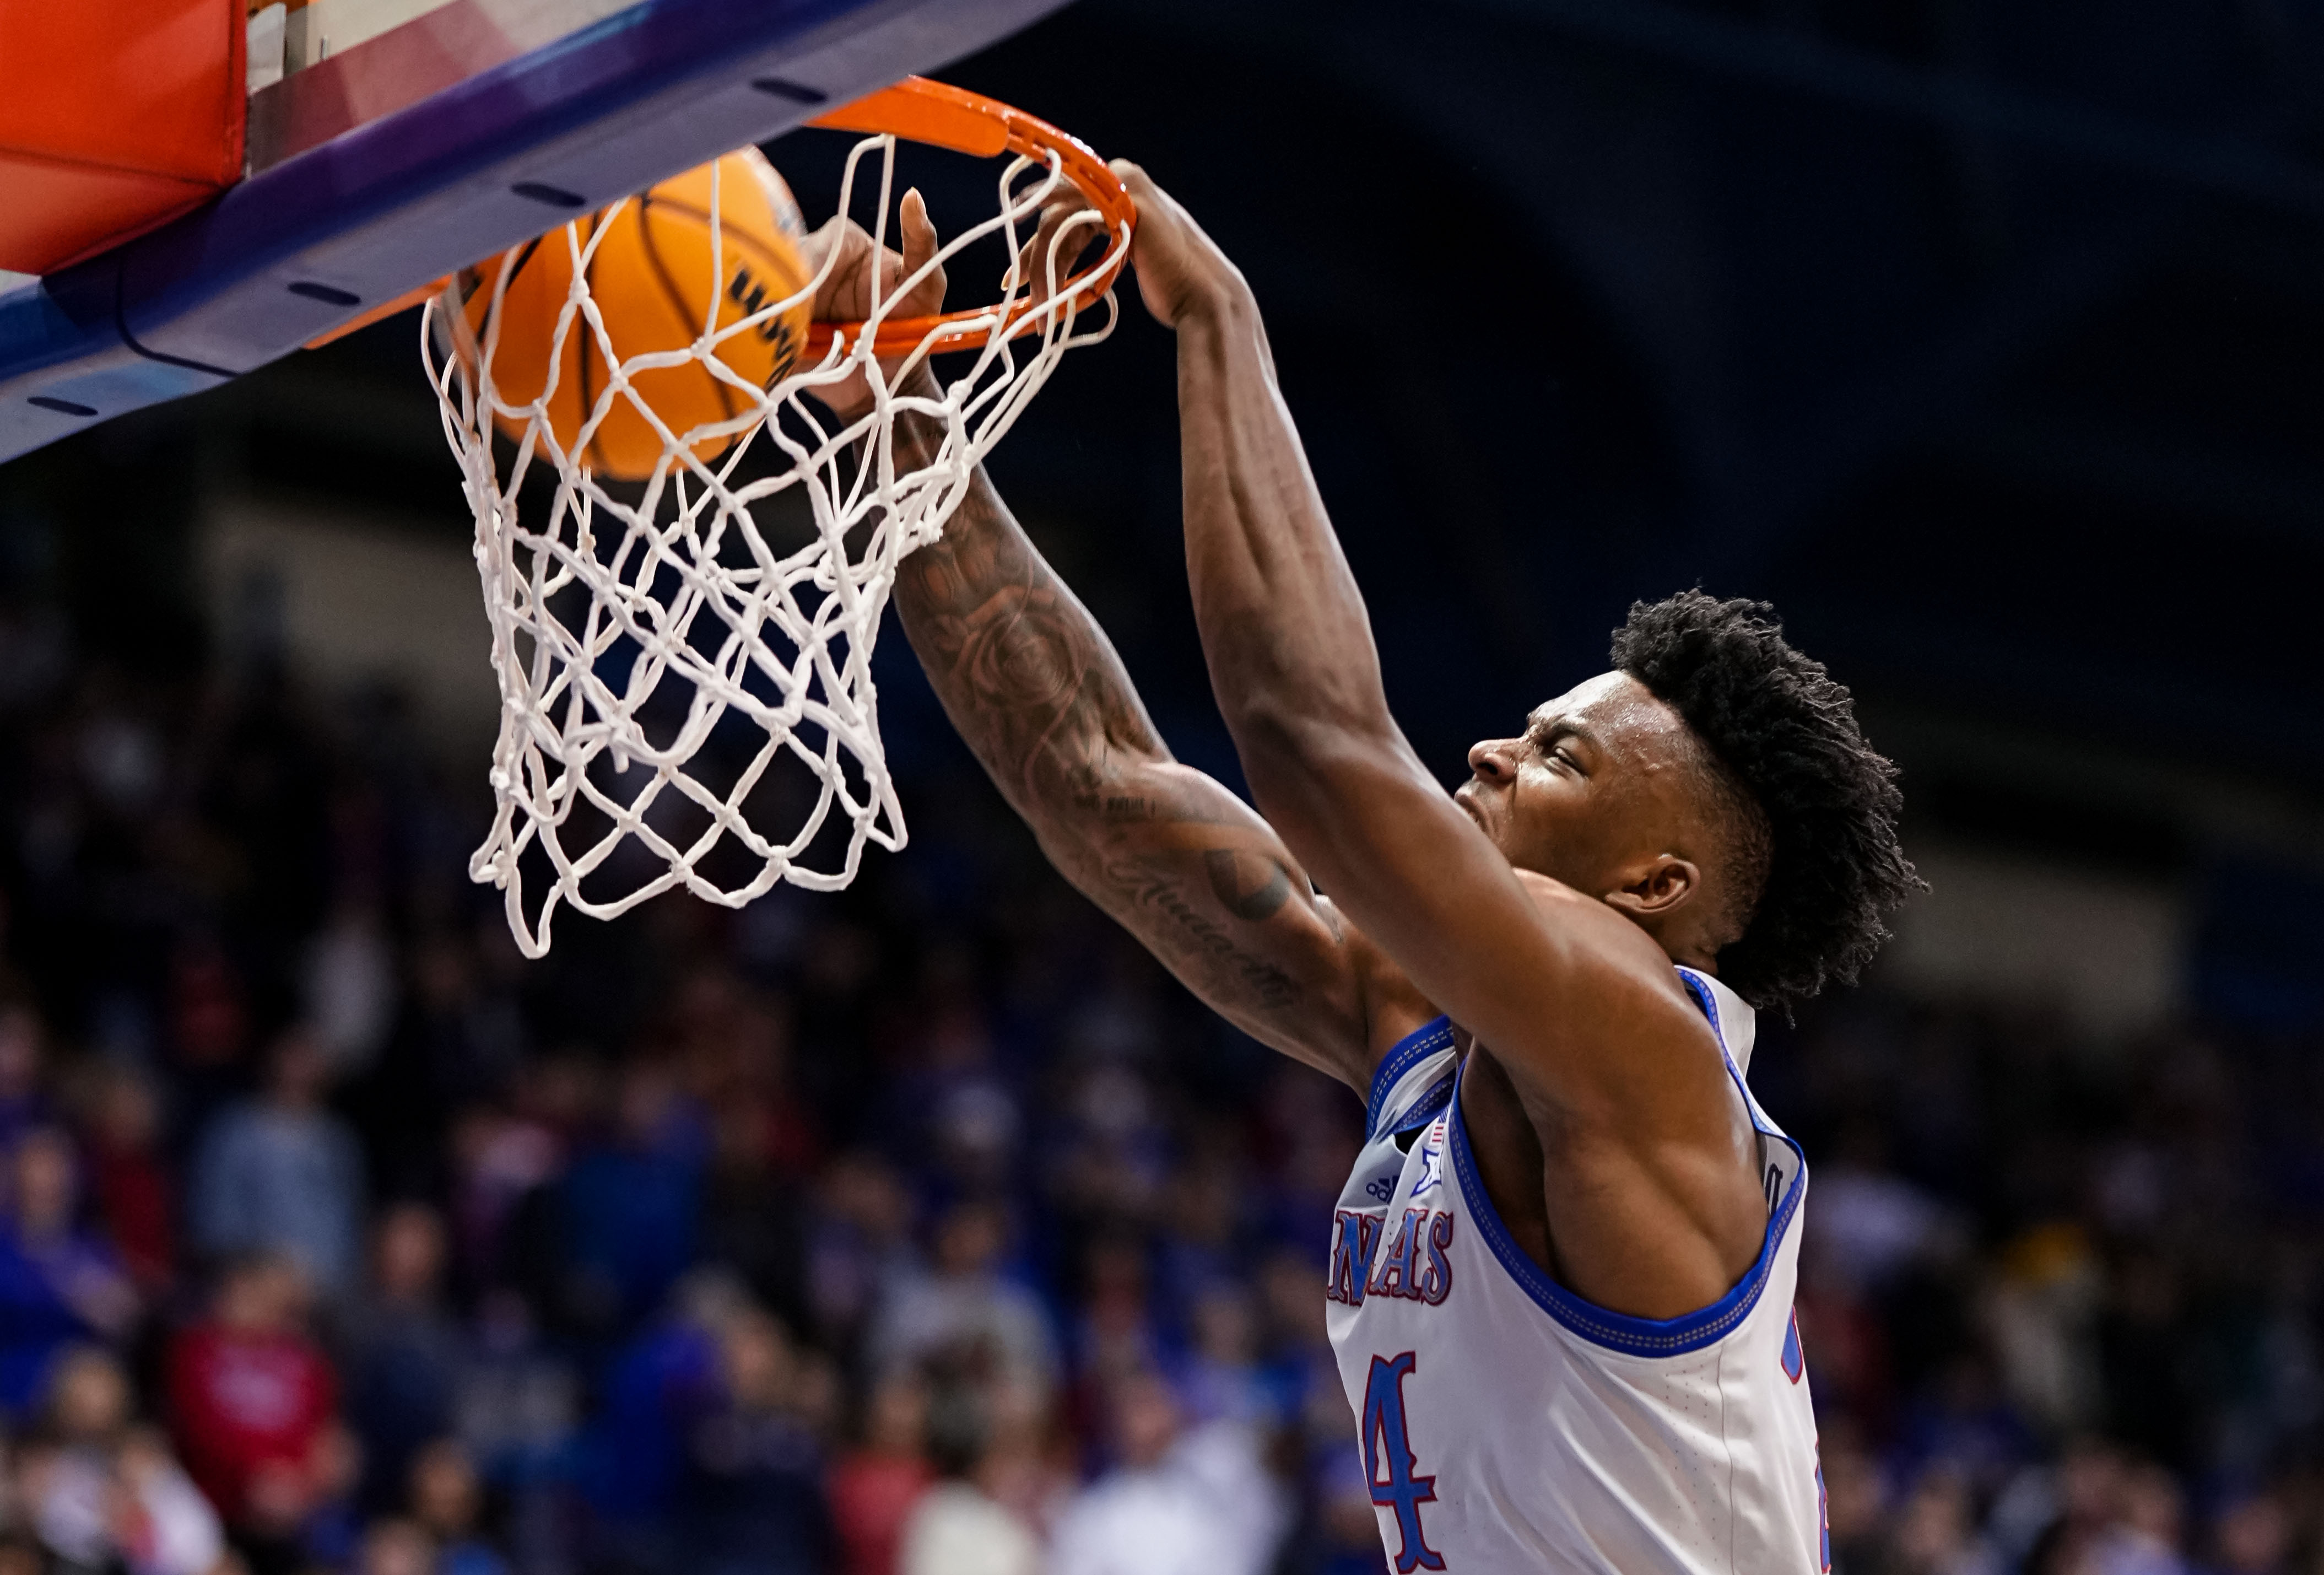 Oklahoma State at Kansas Free Live Stream College Basketball - How to Watch and Stream Major League and College Sports